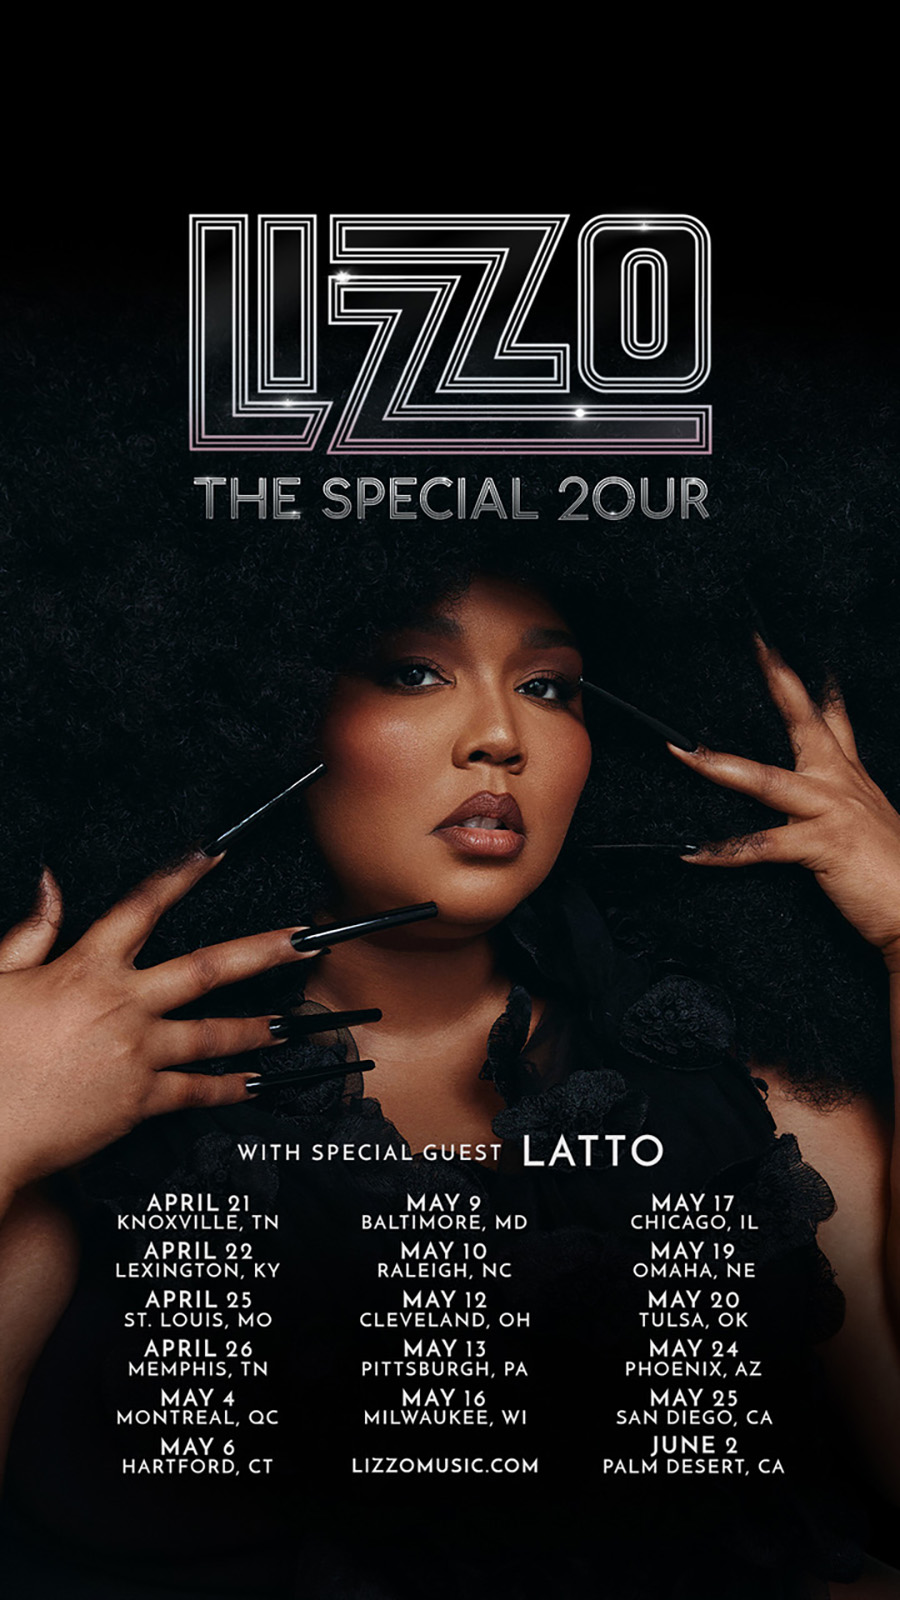 Lizzo - The Special 2our dates